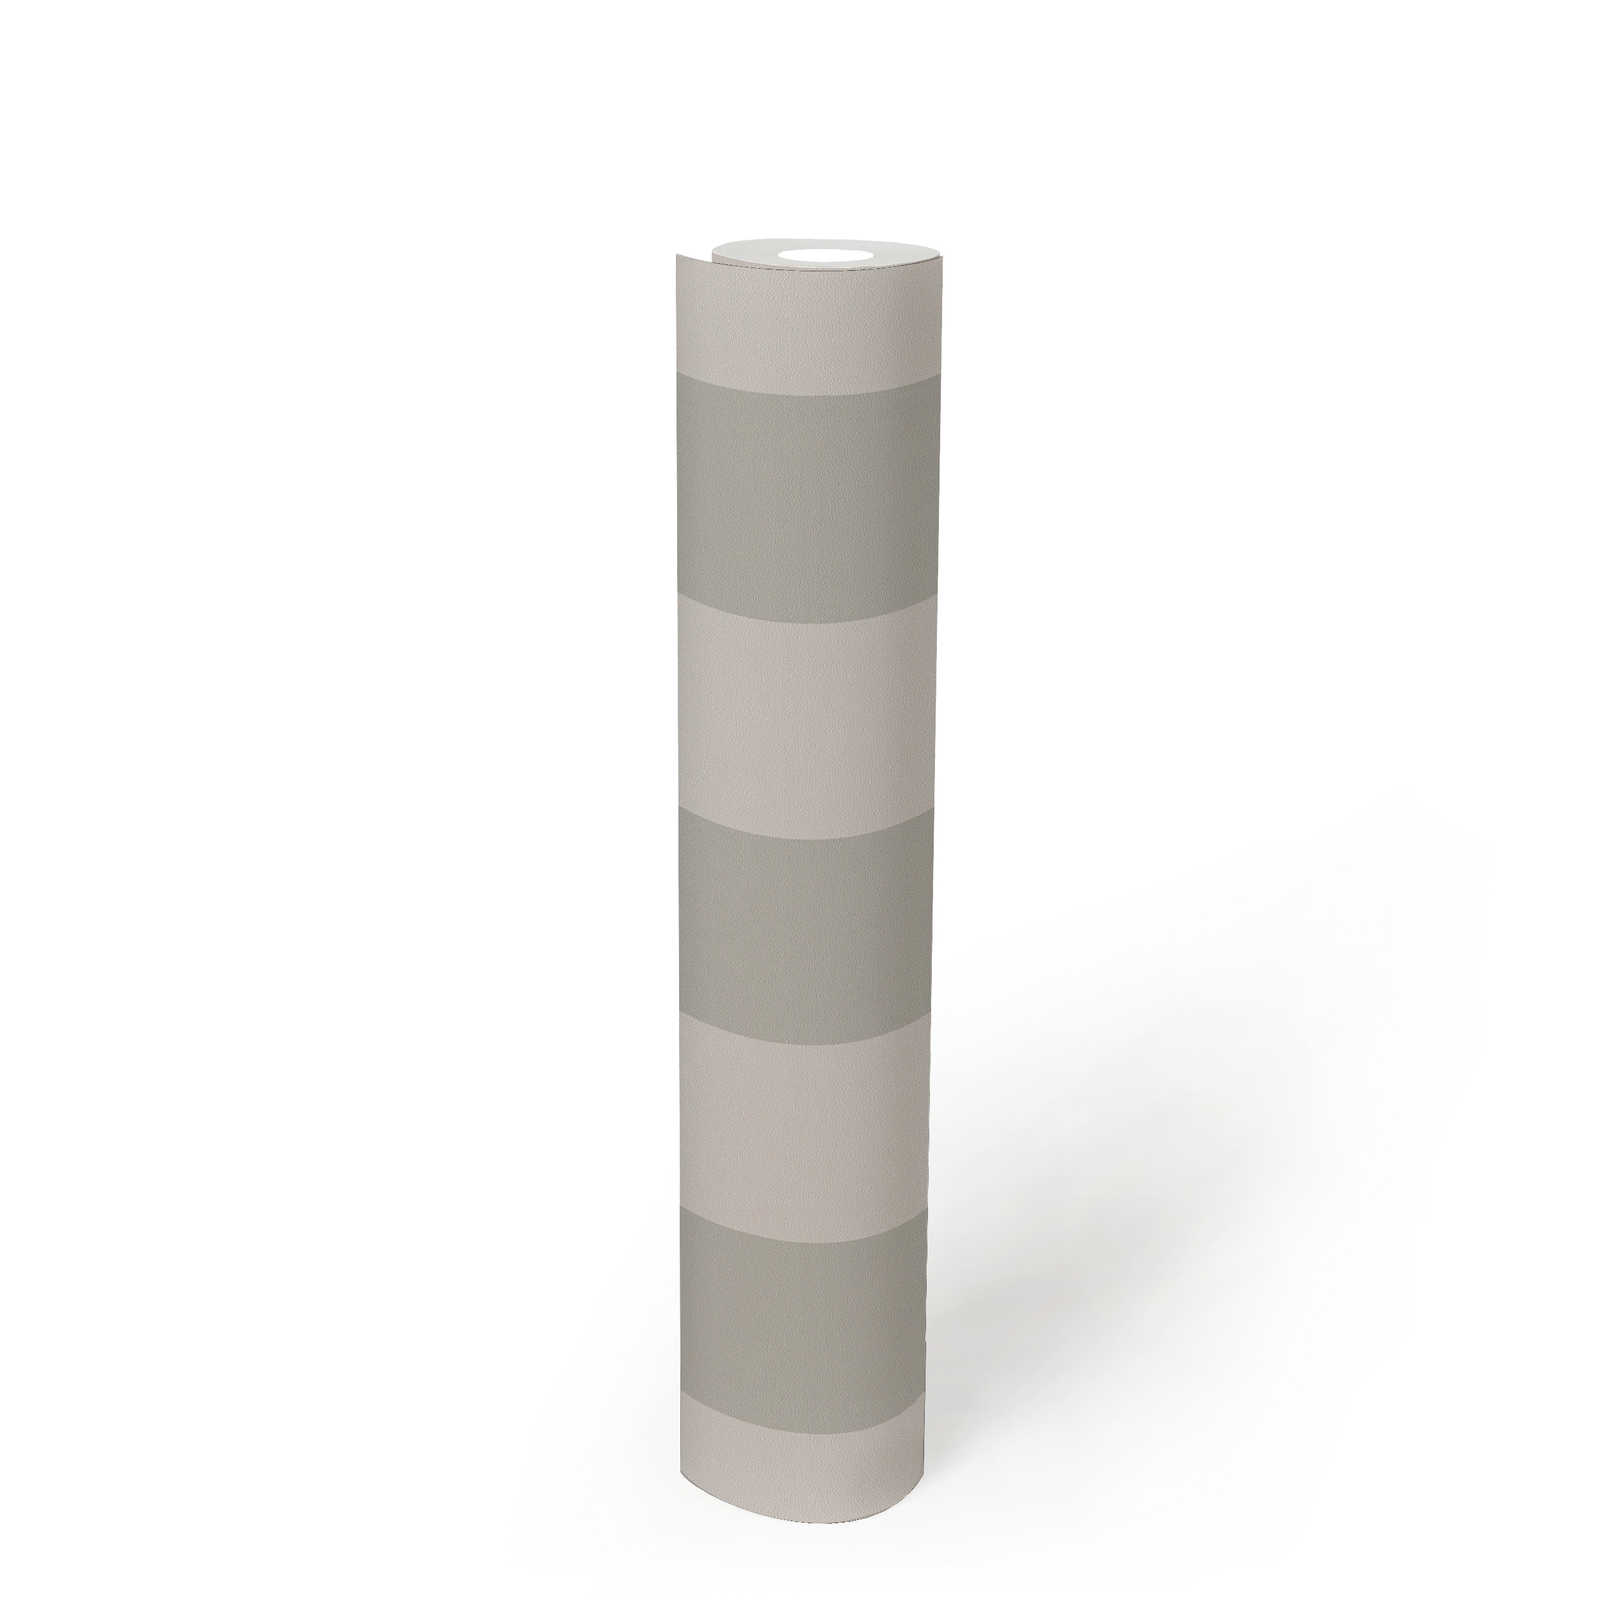             Non-woven wallpaper with block stripes and light structure - grey
        